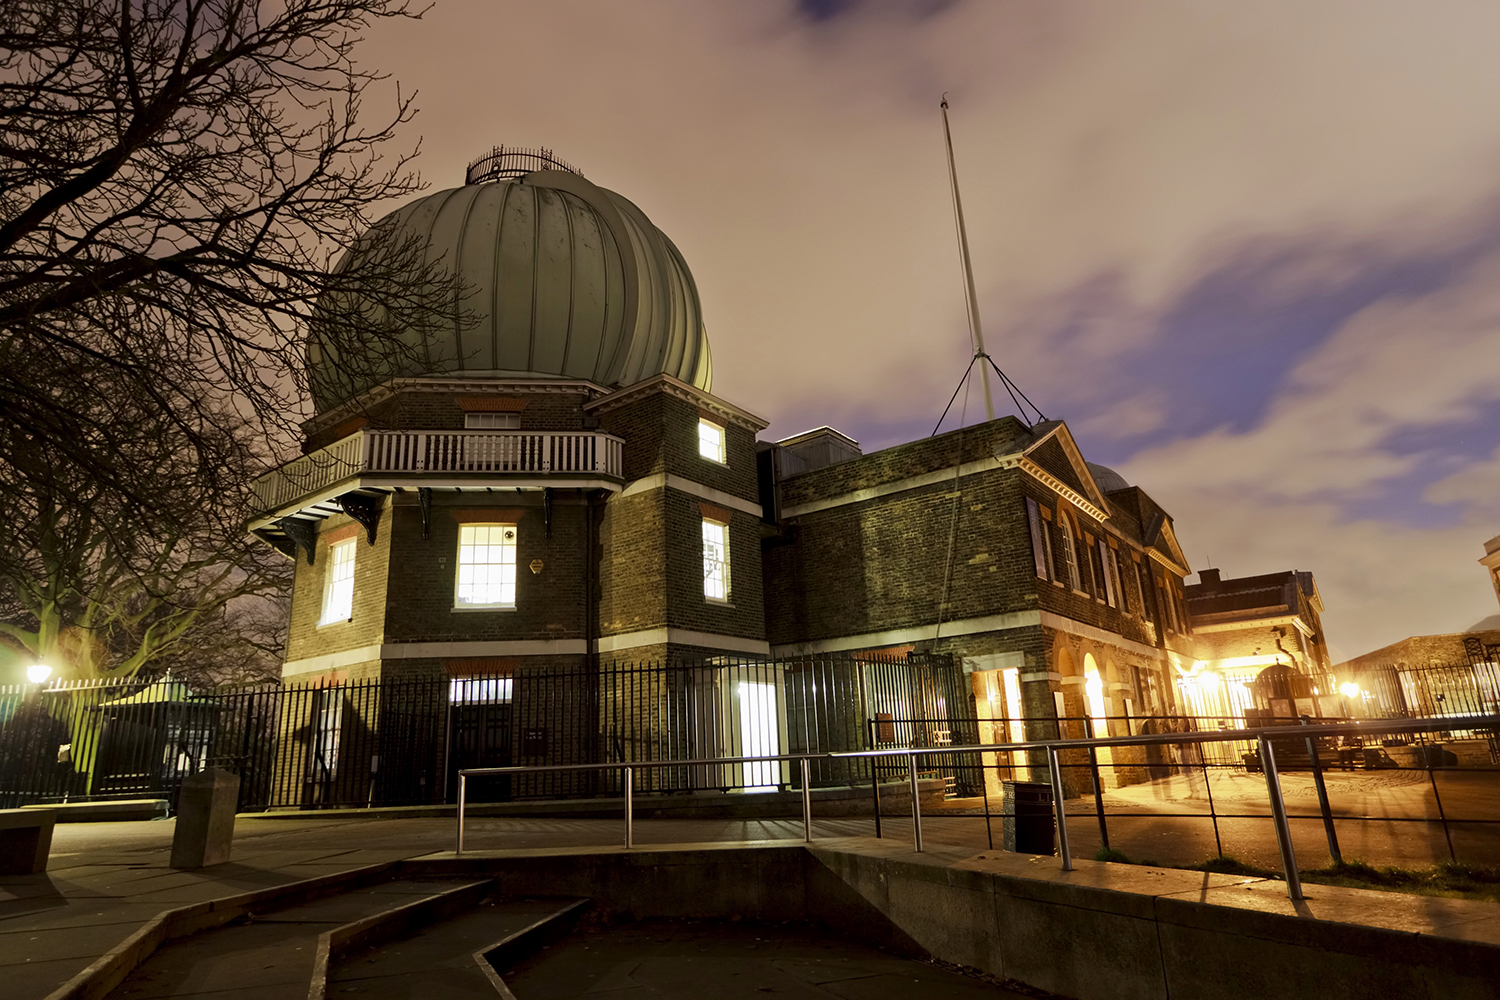 Straddle the hemispheres and contemplate the heavens at the Royal Greenwich Observatory. Image by Plamen Peev / age fotostock / Getty Images